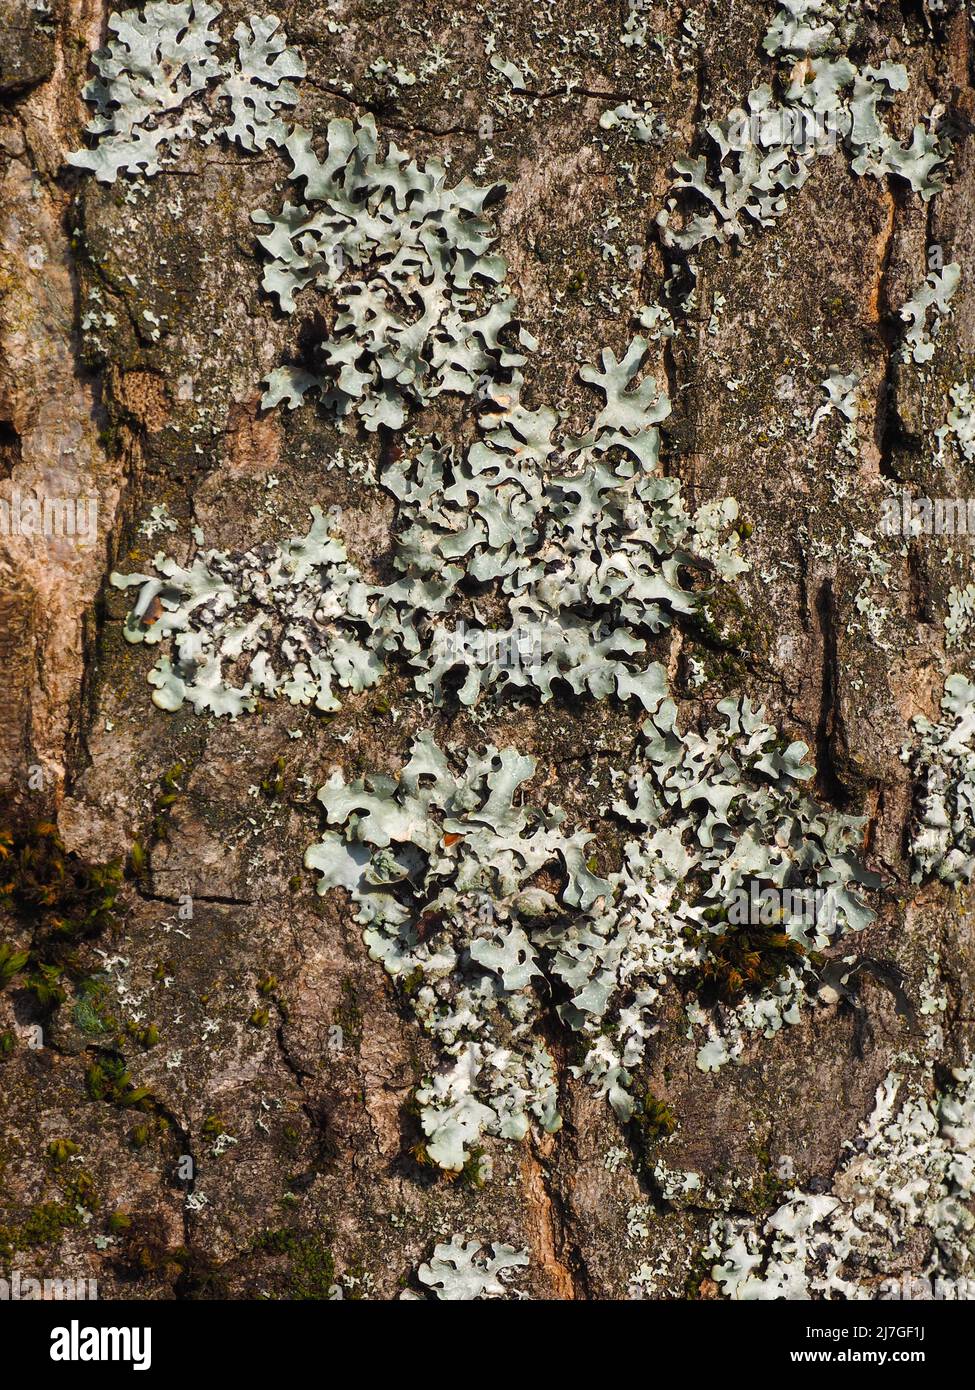 Lichen growing on the bark of a mature tree in a forest in Lancashire, England, UK. Stock Photo